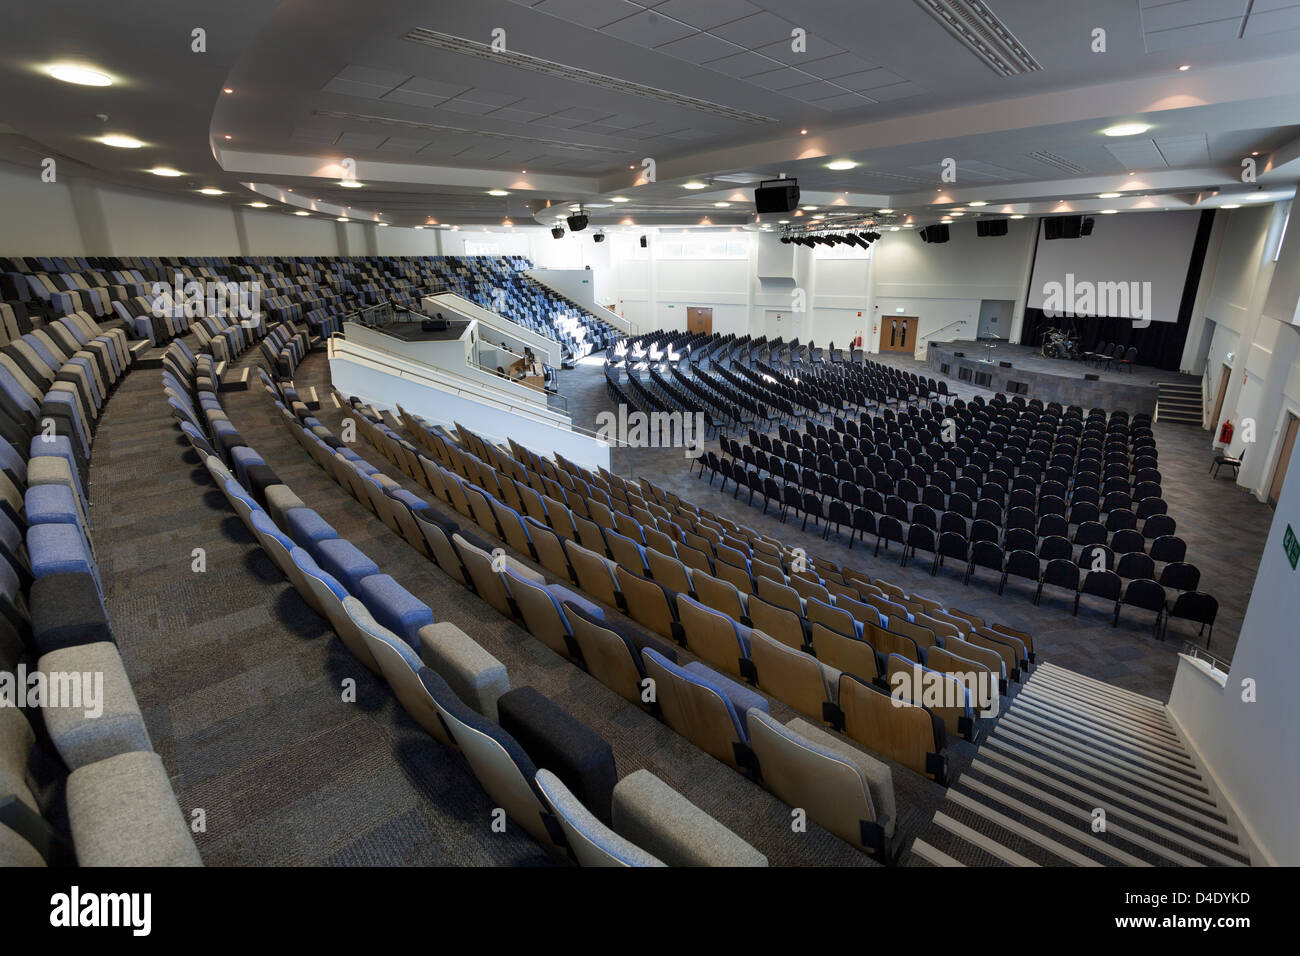 Kings Community Church modern church to hold1200 people with tiered seating. Stock Photo